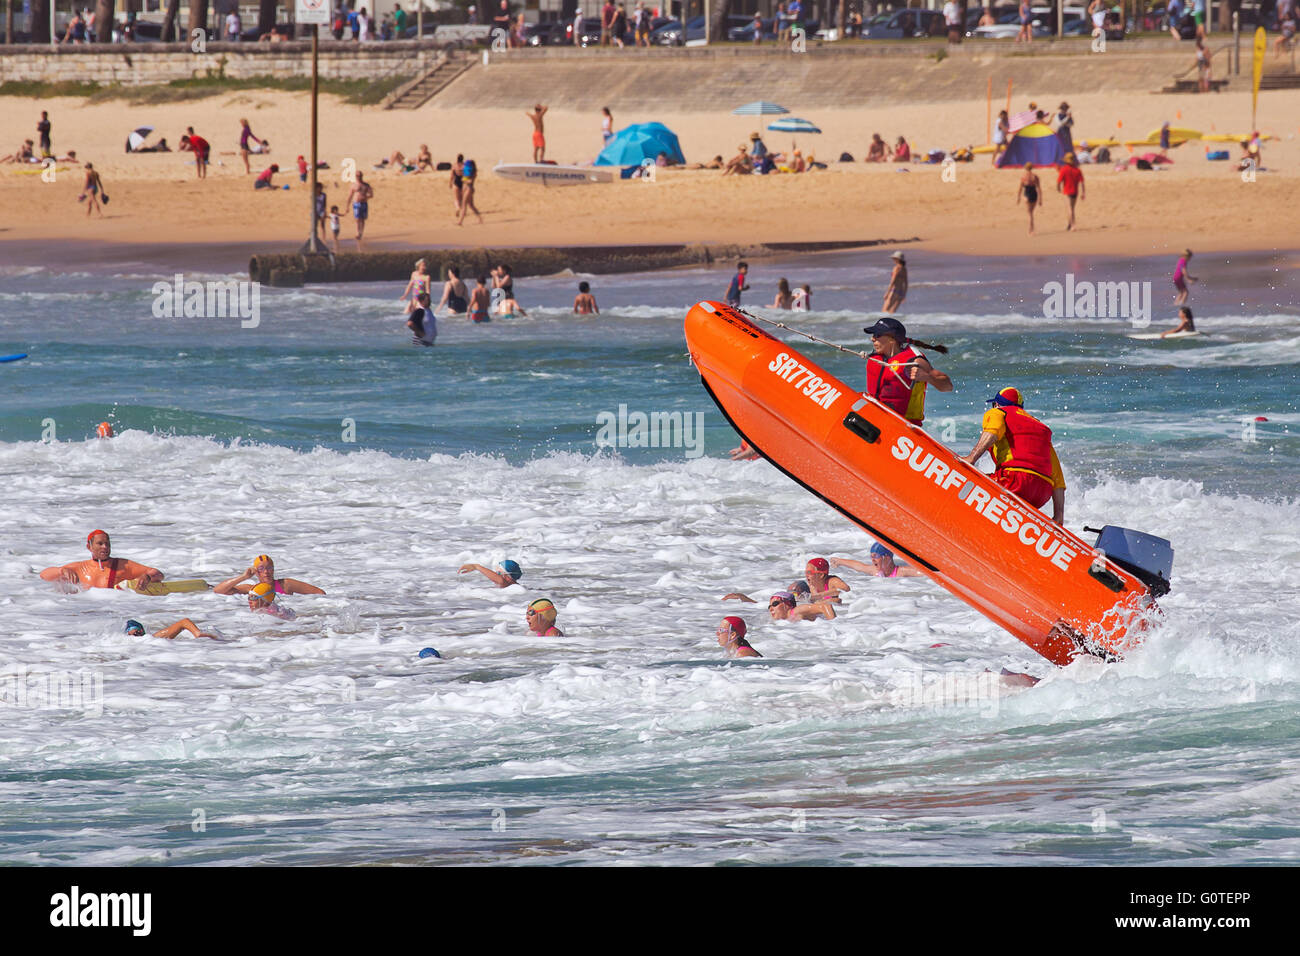 Surf lifesavers get airborne in their dinghy Stock Photo